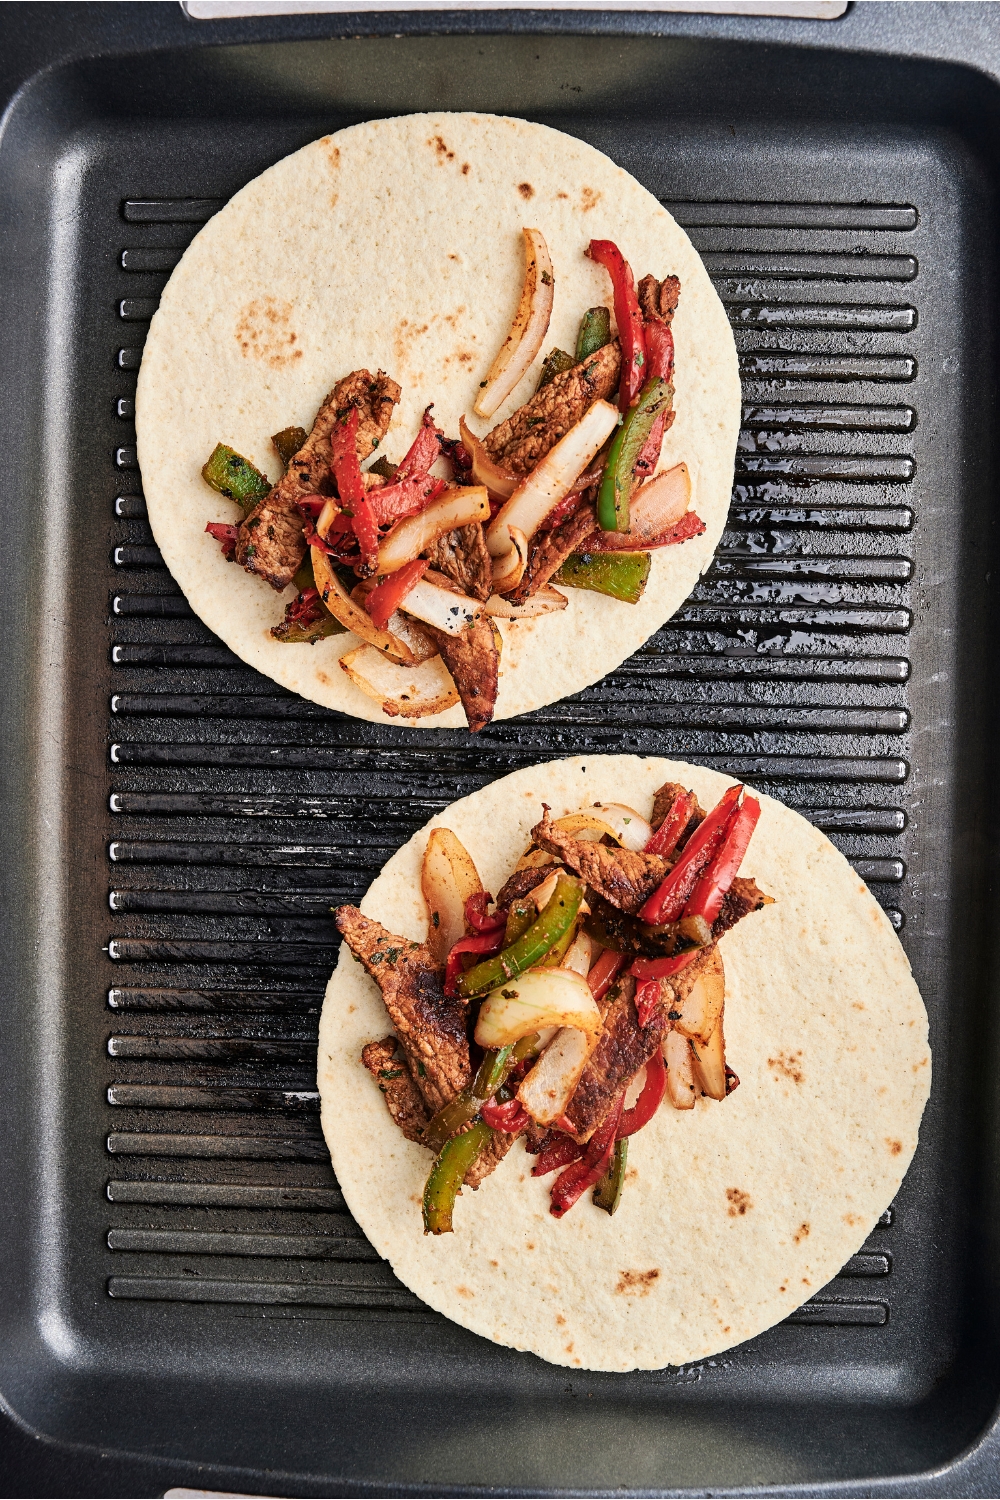 Two tortillas are on a grill tray. There is steak and veggies on each tortilla.